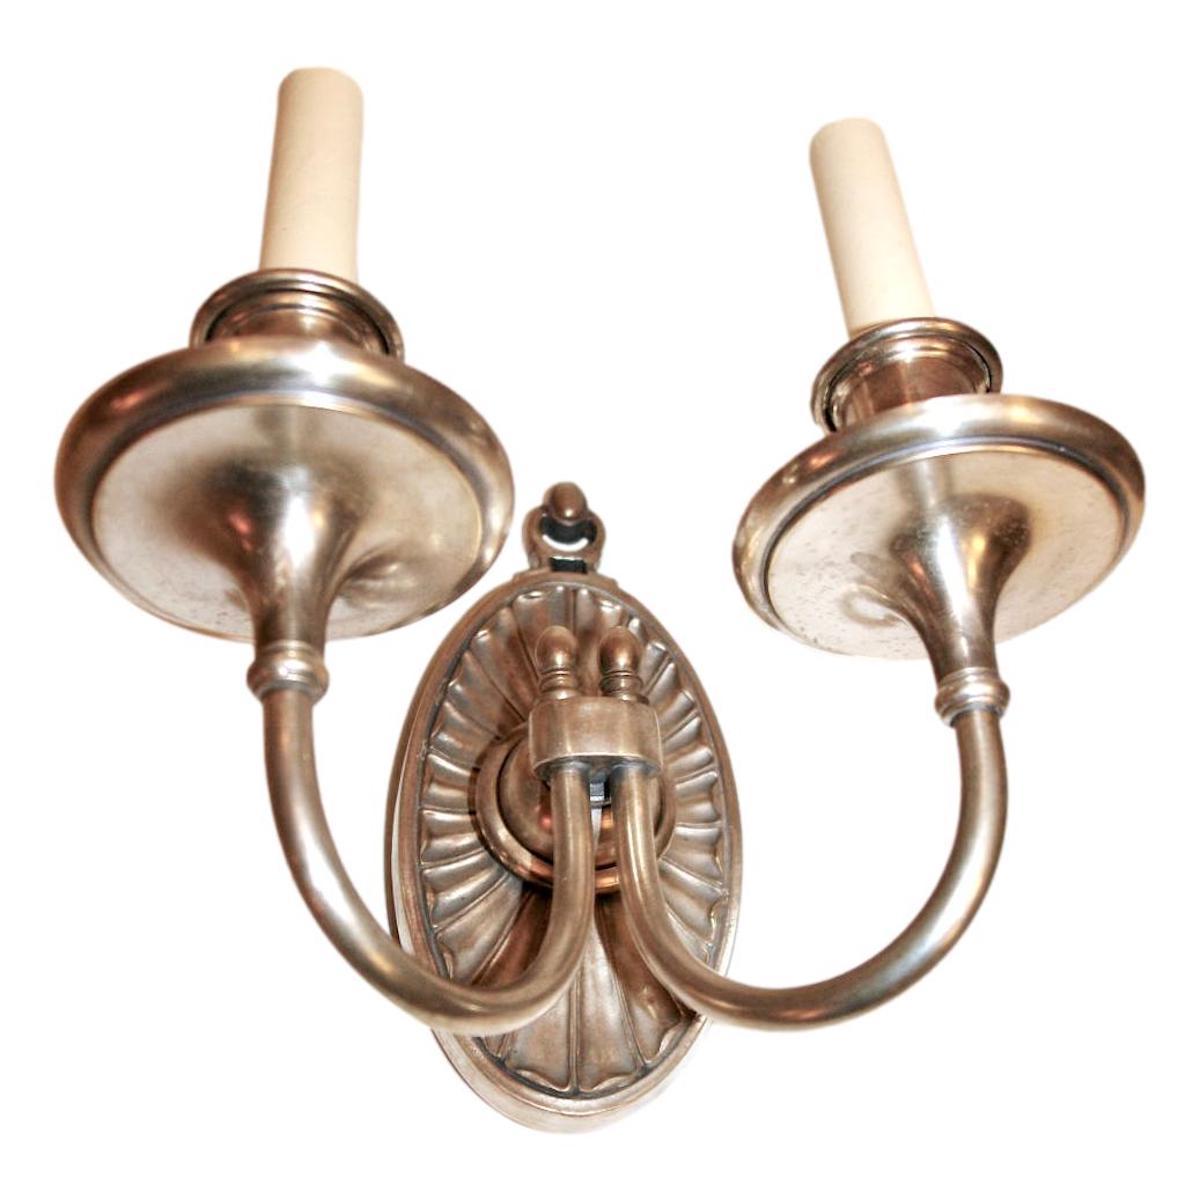 A set of 8 English, circa 1920s silver-plated double light sconces. Sold in pairs.

Measurements:
Height: 8